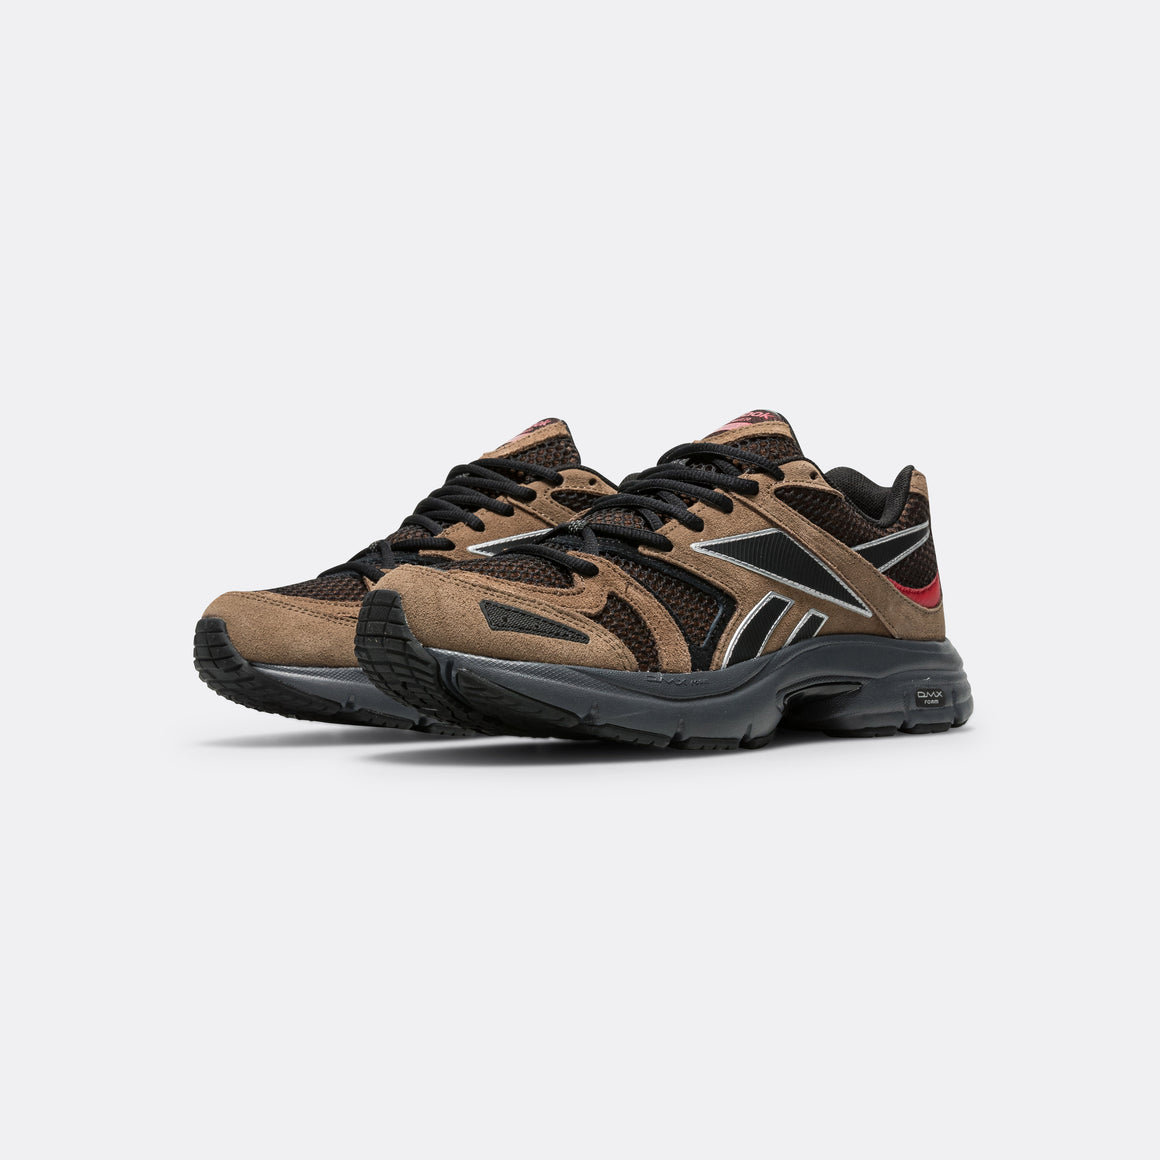 Reebok - Premier Road Plus VI - Utility Brown/Black-Vector Red - UP THERE